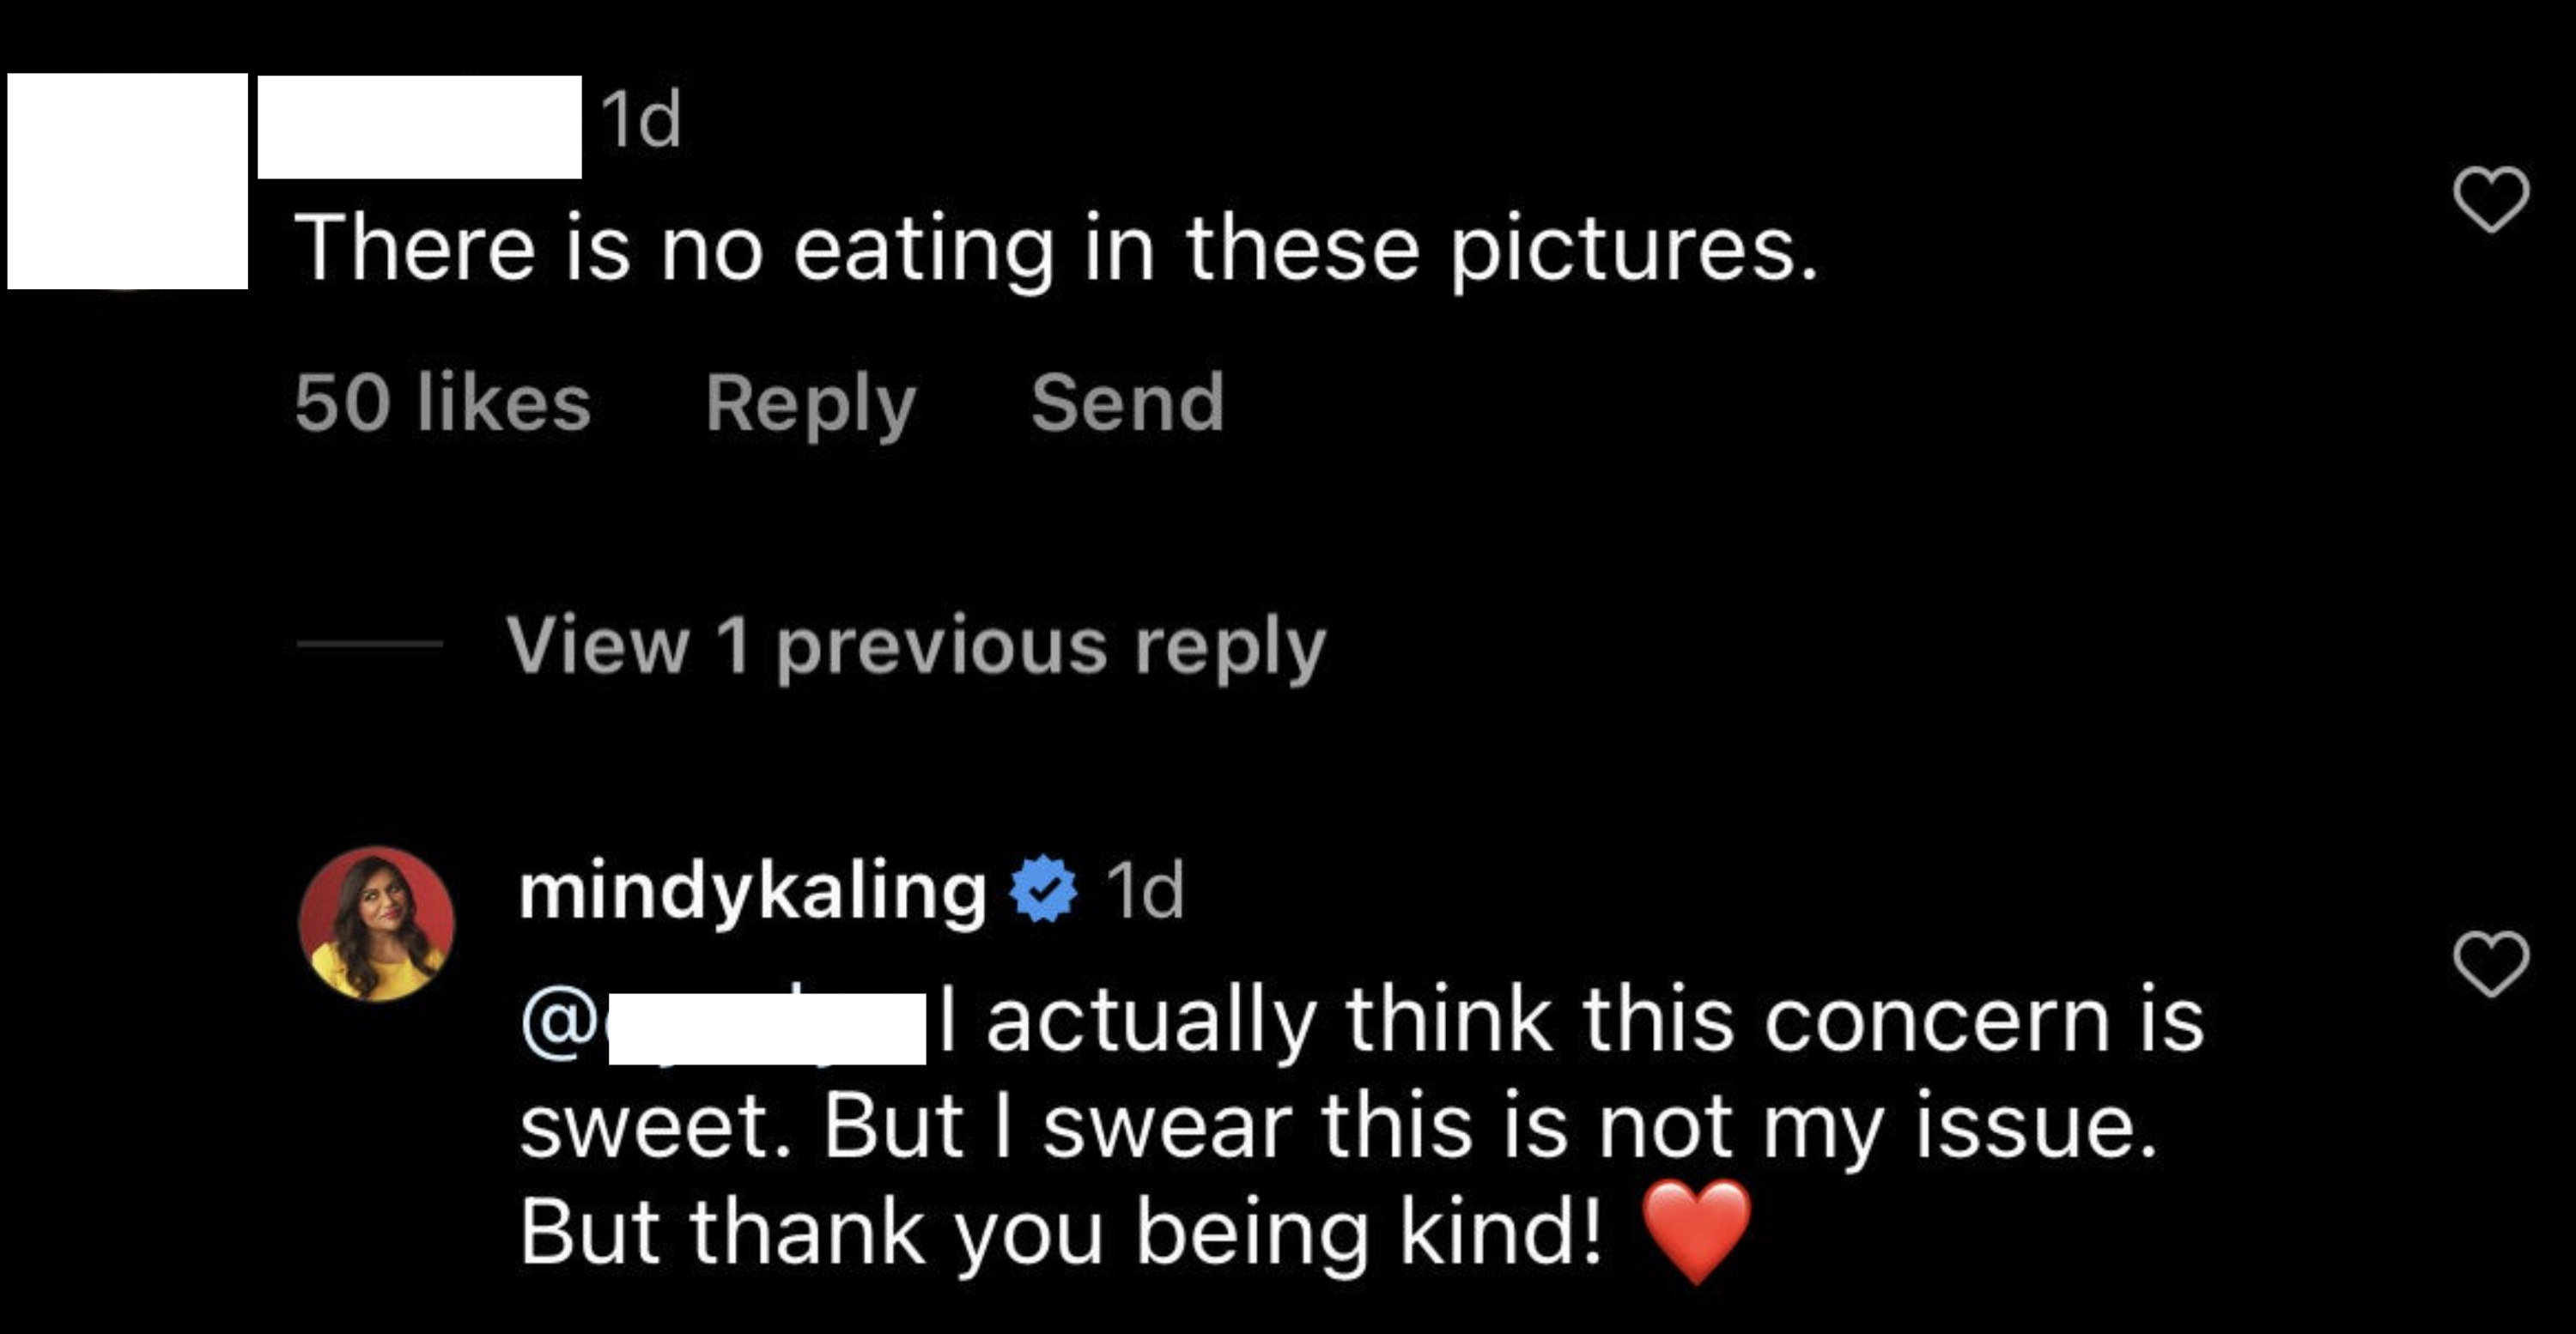 &quot;There is no eating in these pictures&quot;; her response: &quot;I actually think this concern is sweet, but I swear this is not my issue, but thank you being kind!&quot;